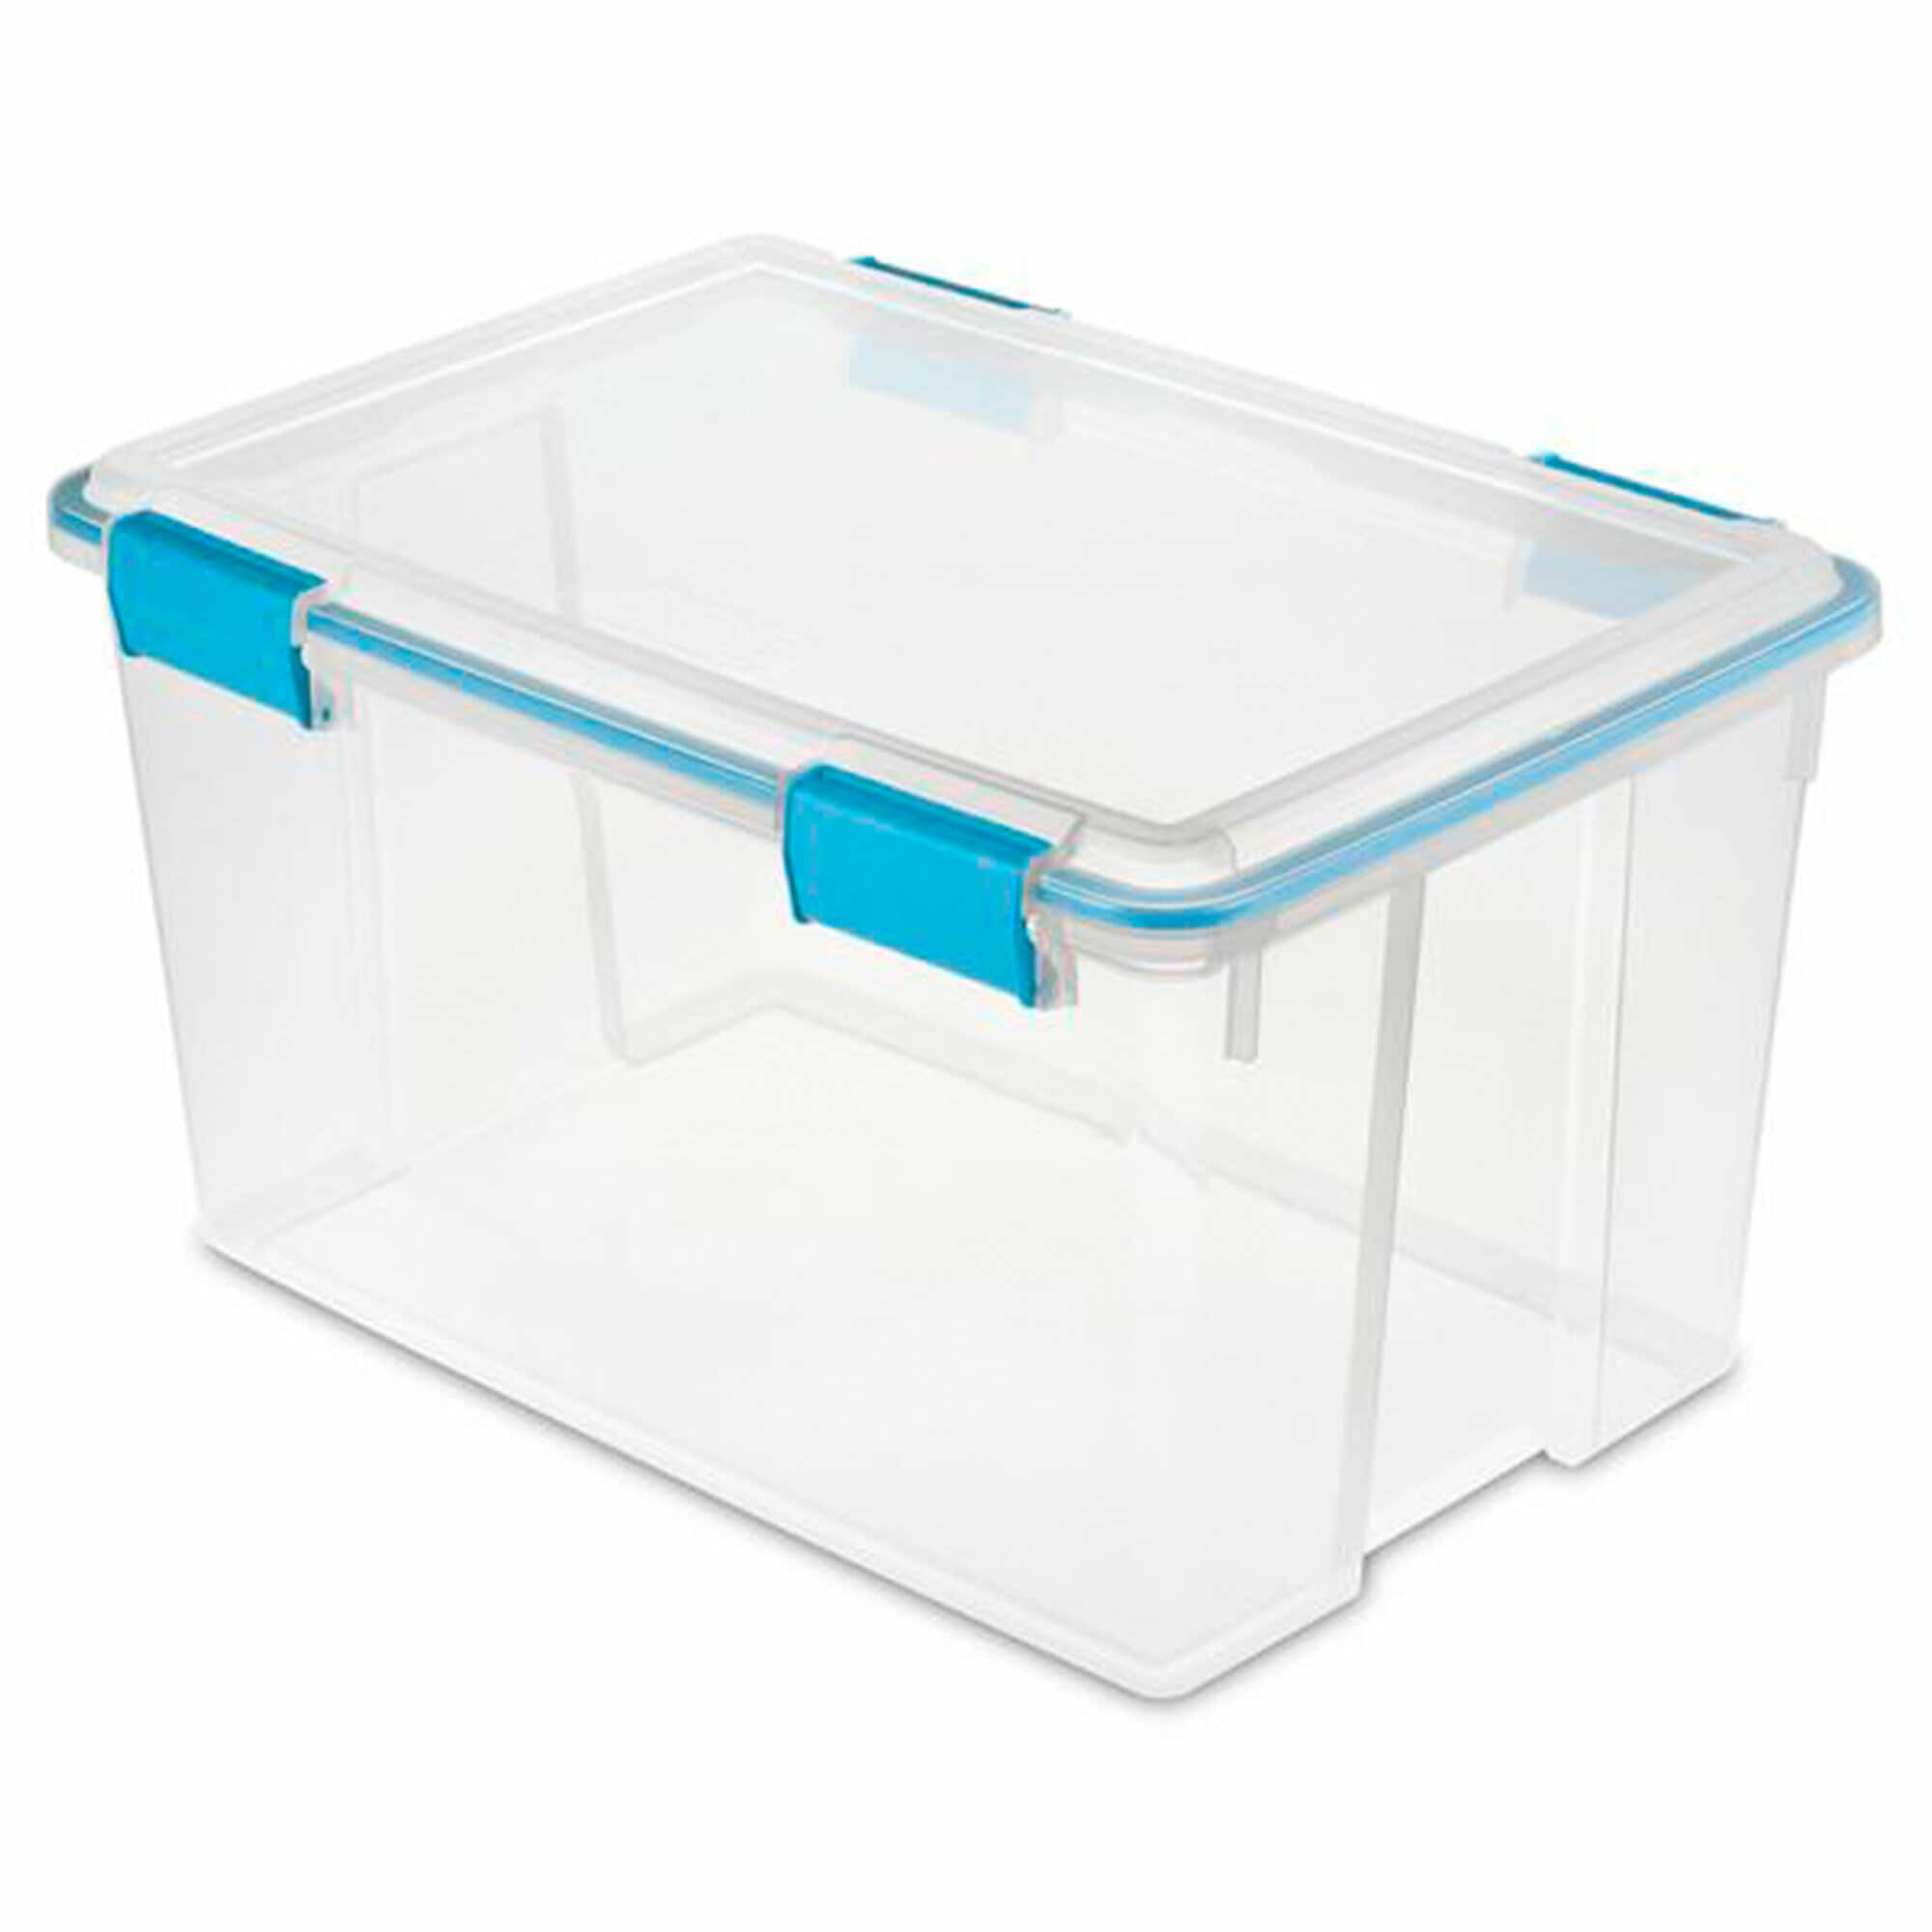 Sterilite Medium Clip Box, Stackable Small Storage Bin With Latching Lid,  Plastic Container To Organize Office, Crafts, Clear Base And Lid, 4-pack :  Target